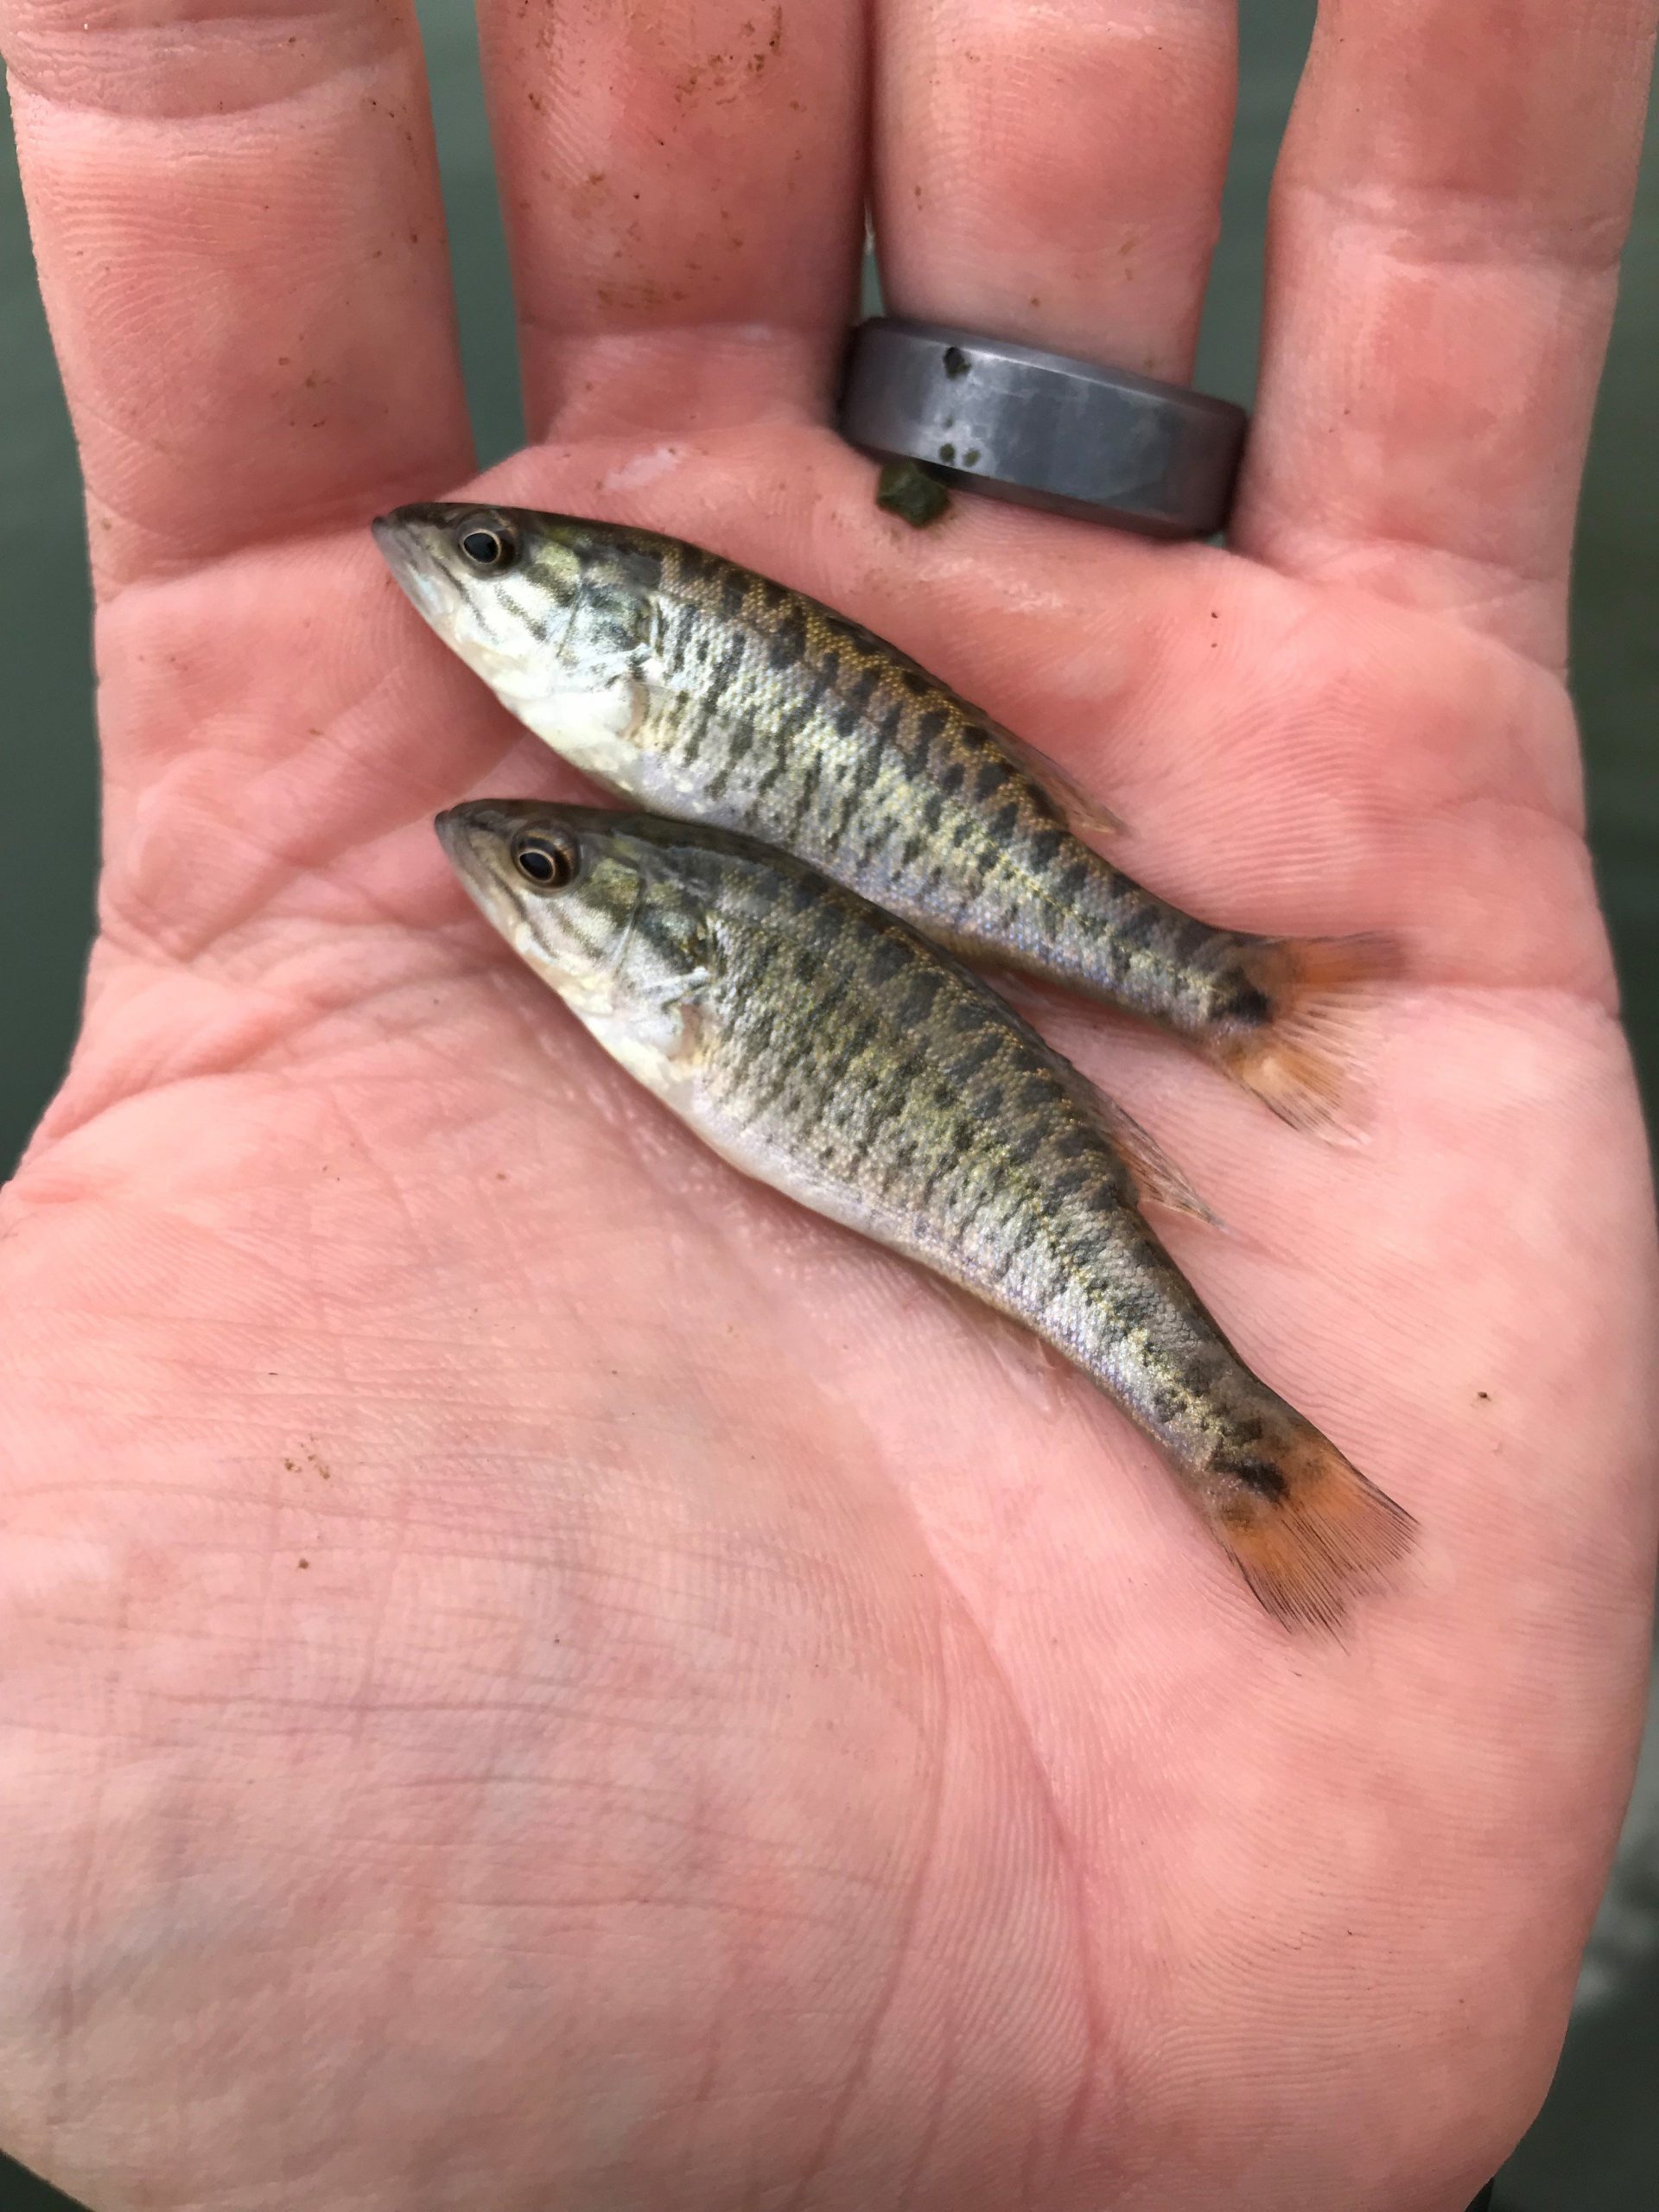 Shoal Bass Fingerling released by Florida FWC in Chipola River